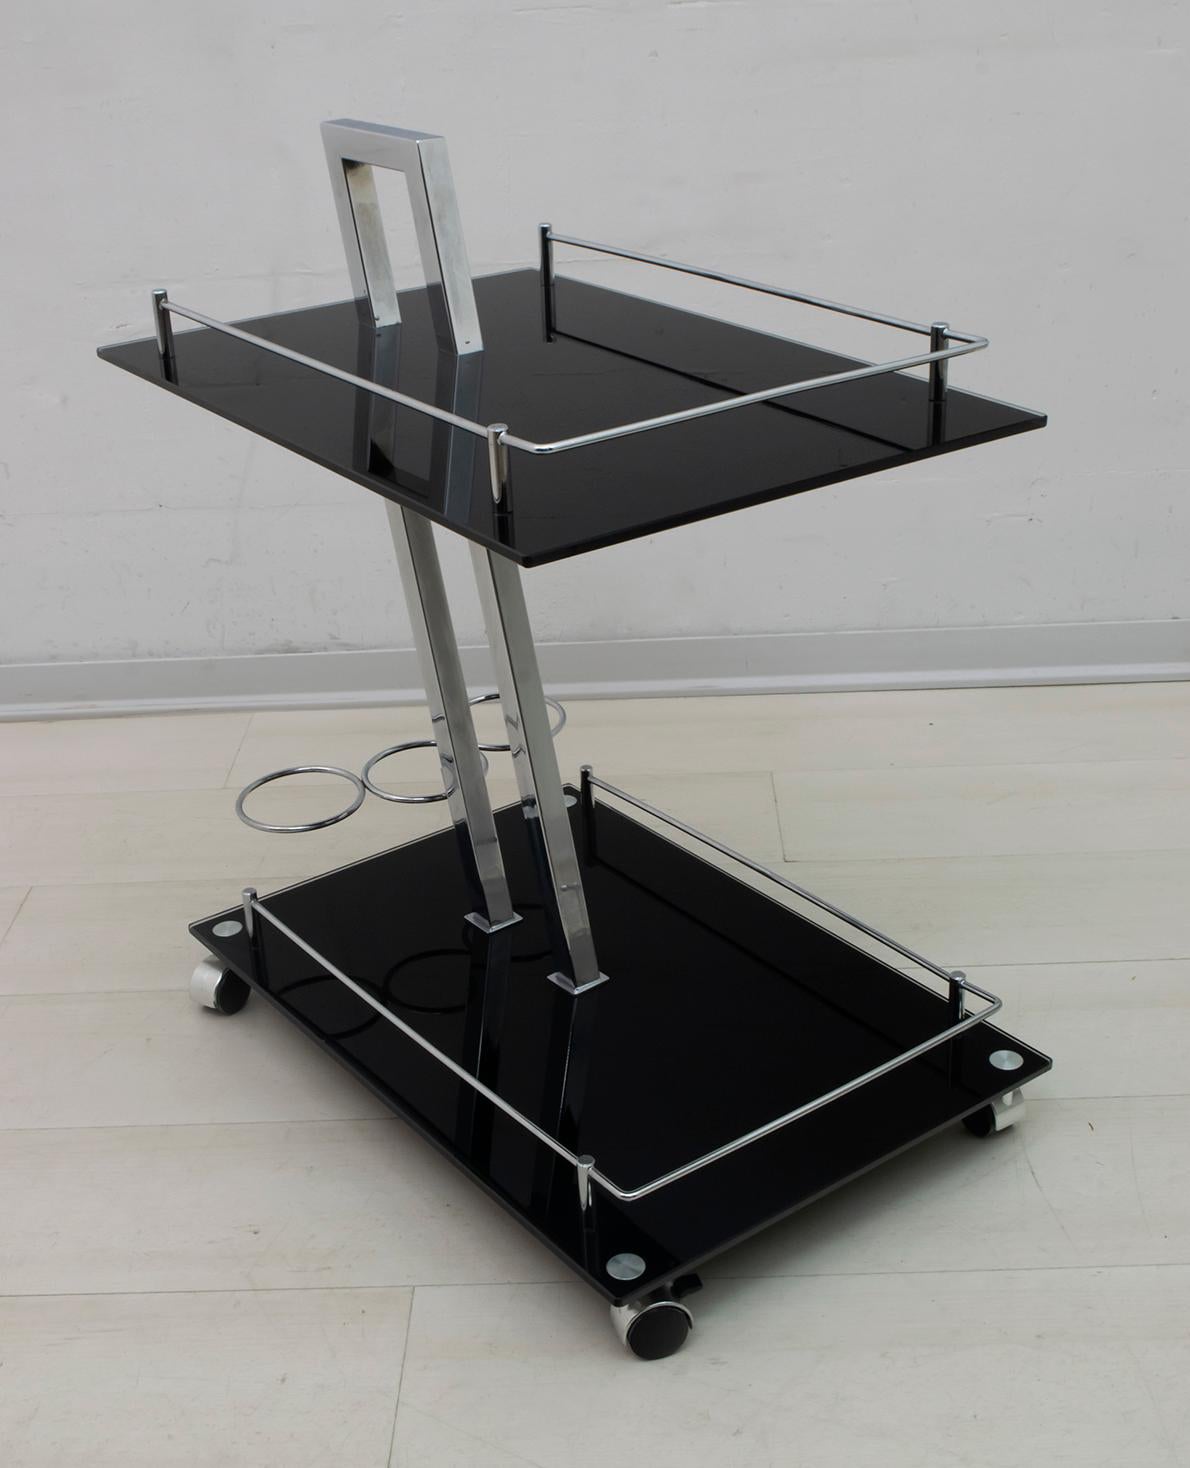 High-end modernist bar trolley made with sturdy chrome frame and black tempered glass, attributed to Willy Rizzo.